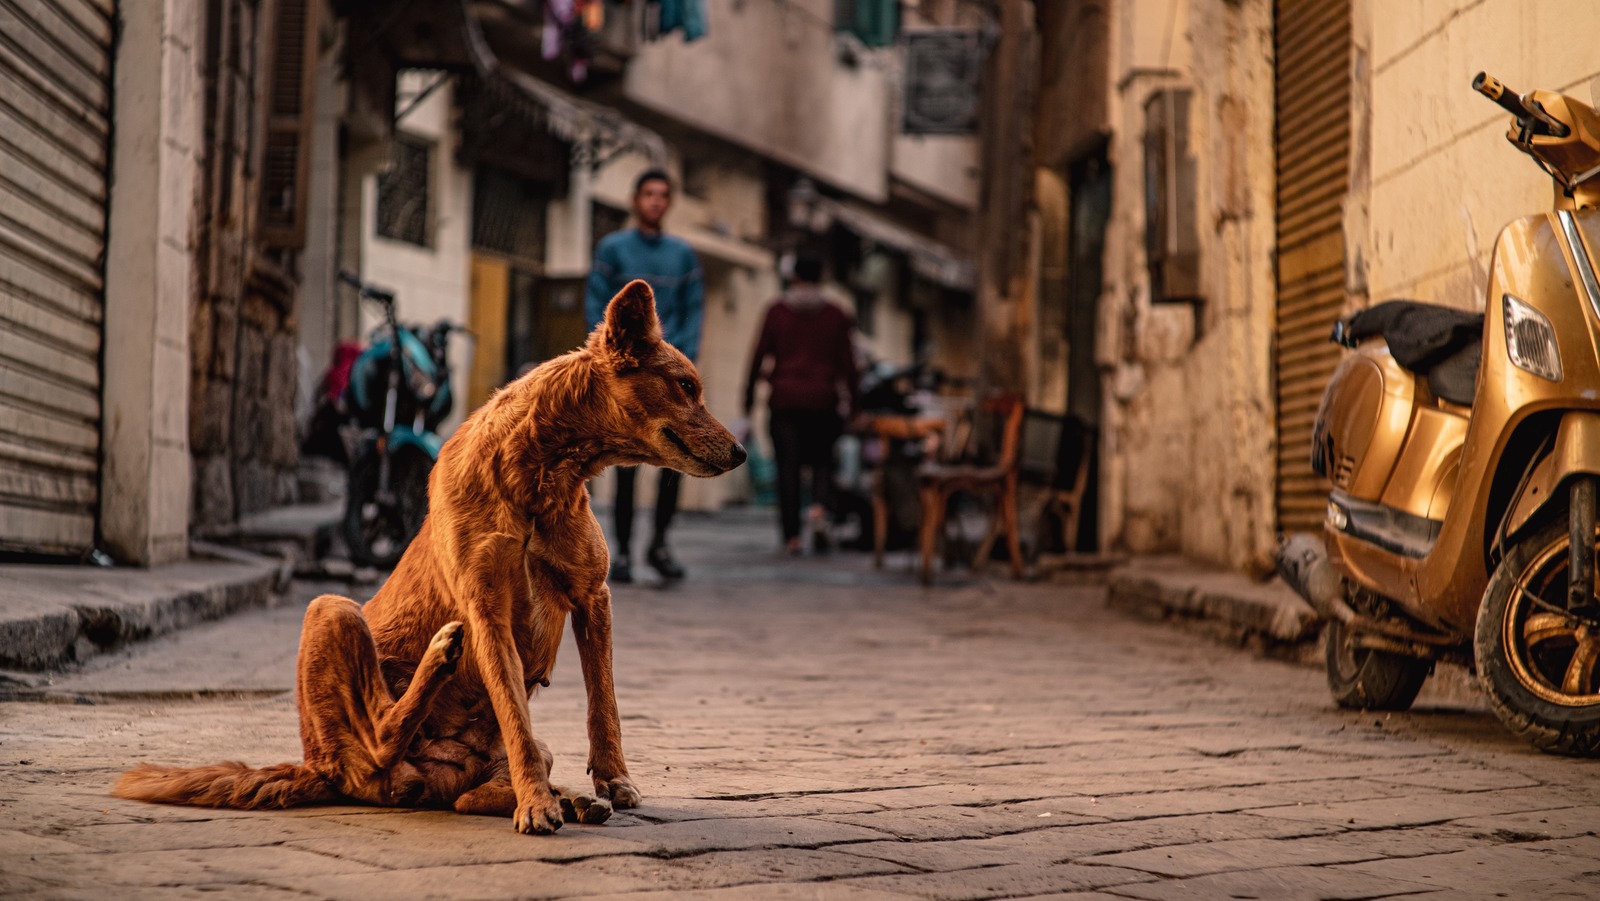 The Real Reason There Are So Many Stray Dogs In Egypt